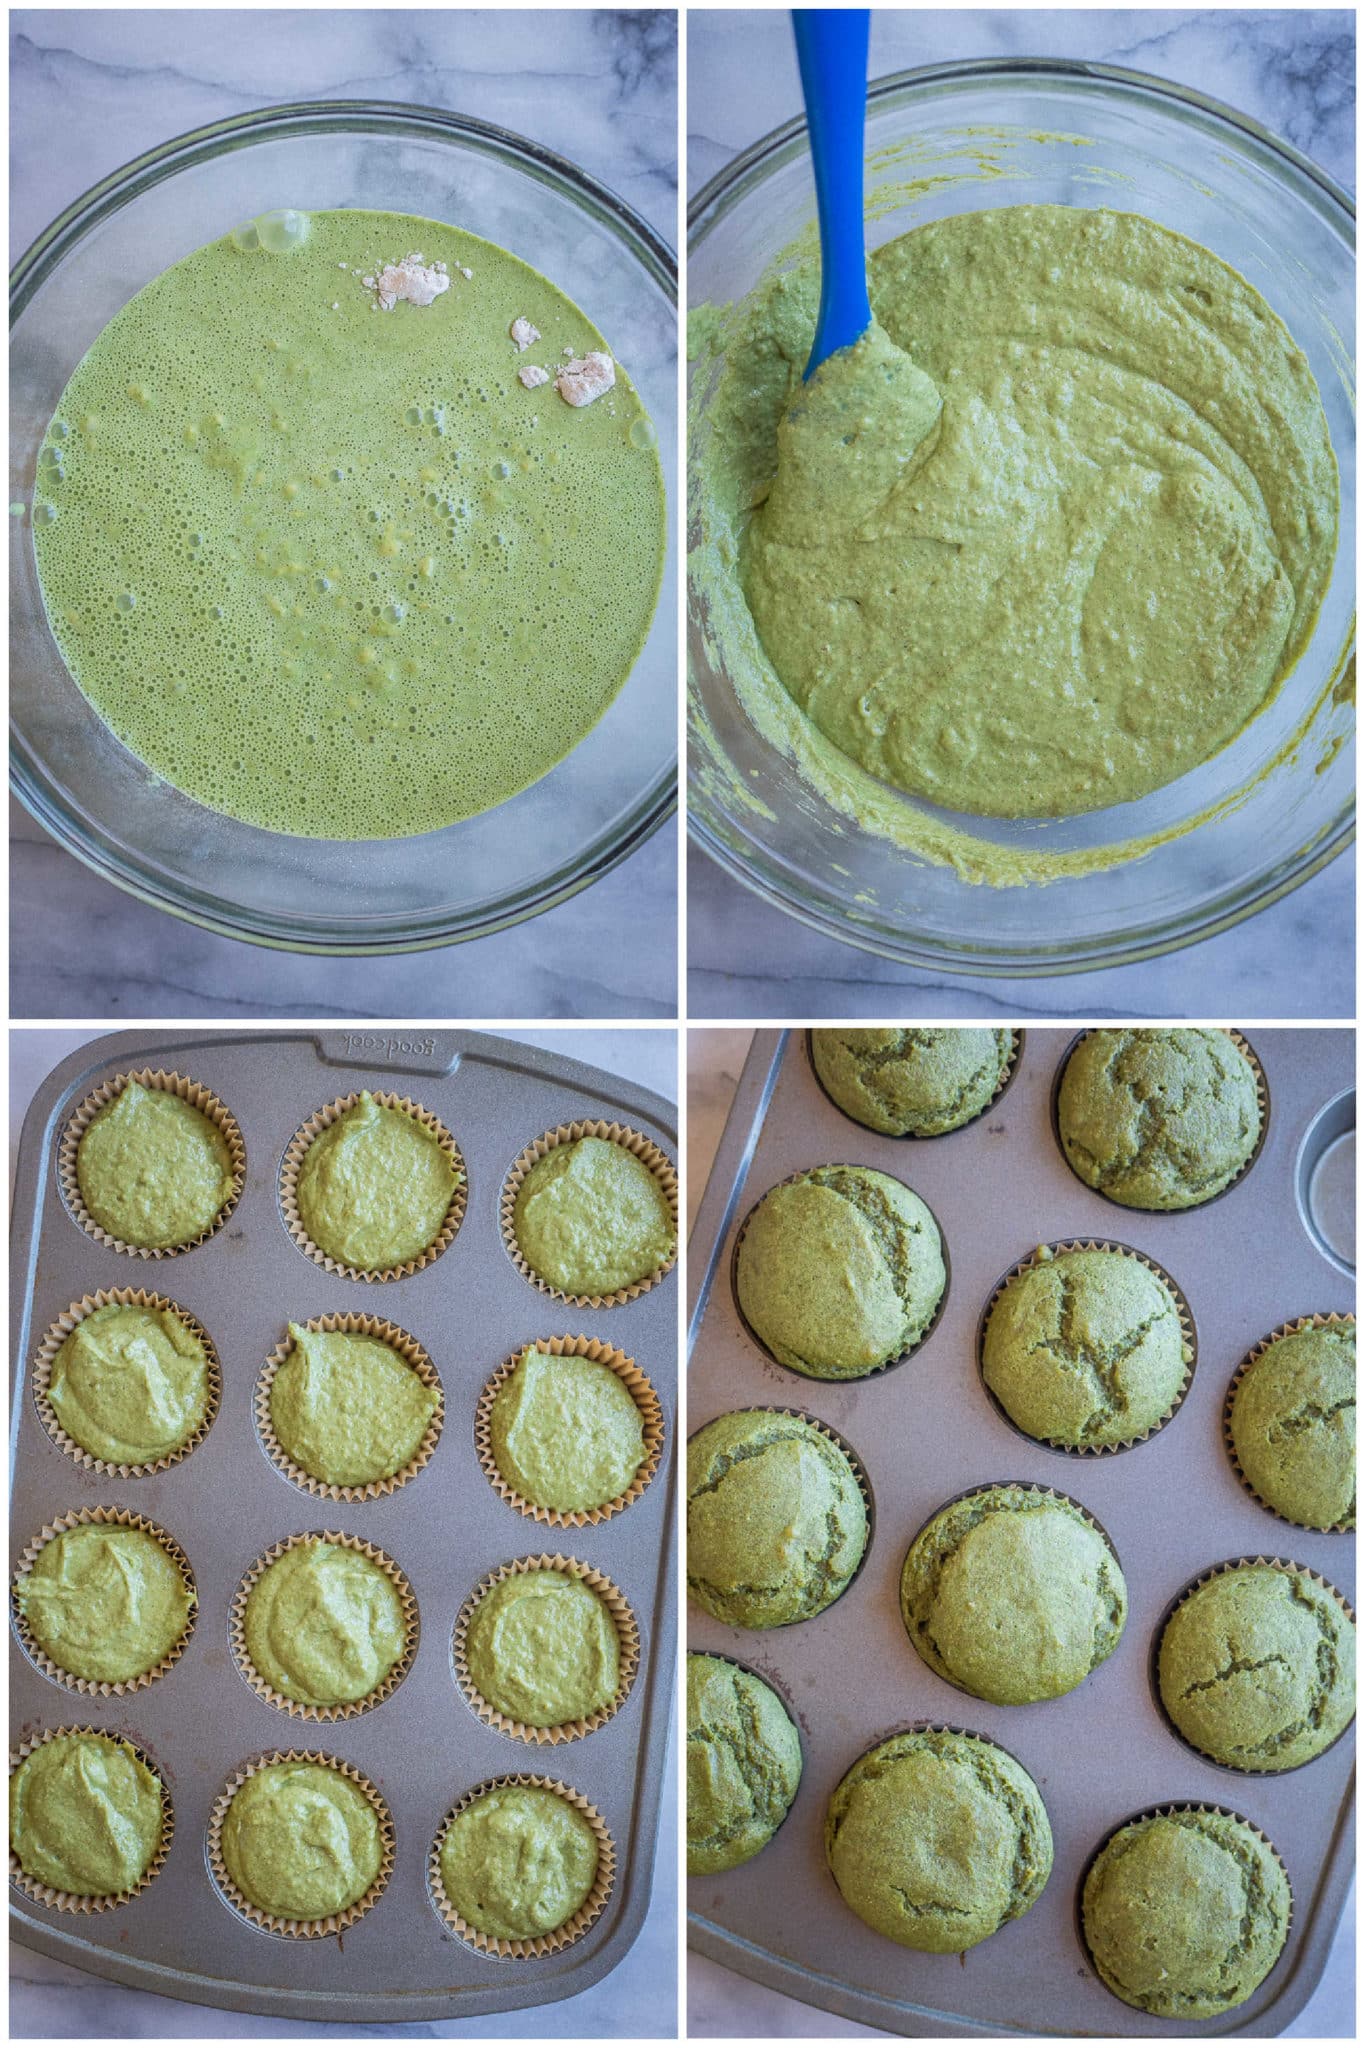 showing how to make green muffins in a muffin tin